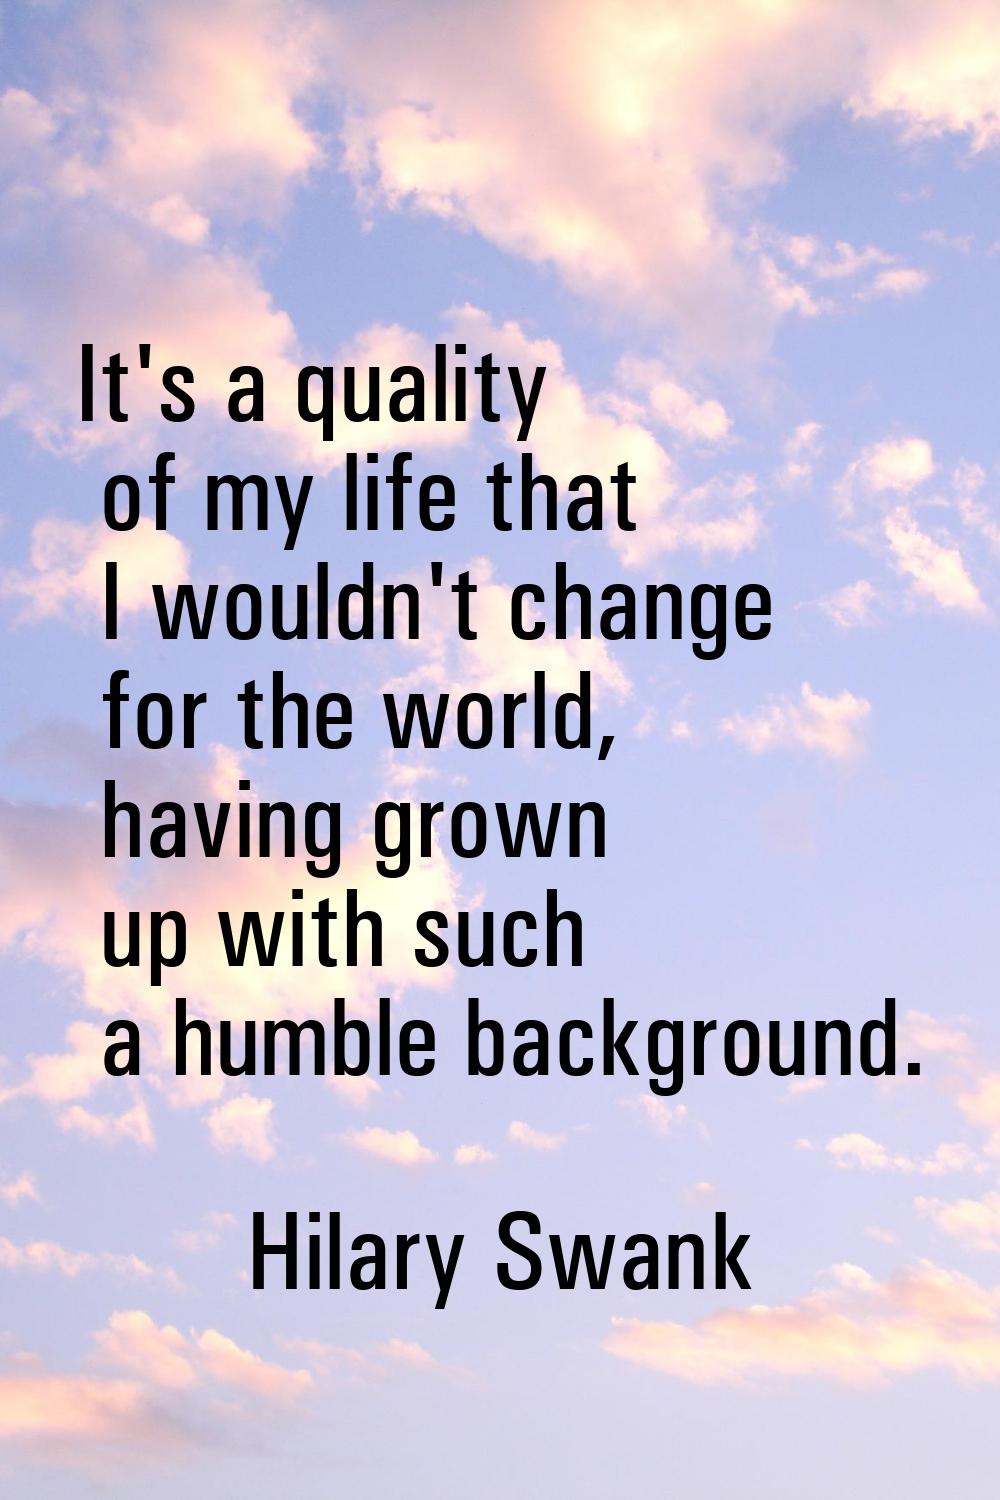 It's a quality of my life that I wouldn't change for the world, having grown up with such a humble 